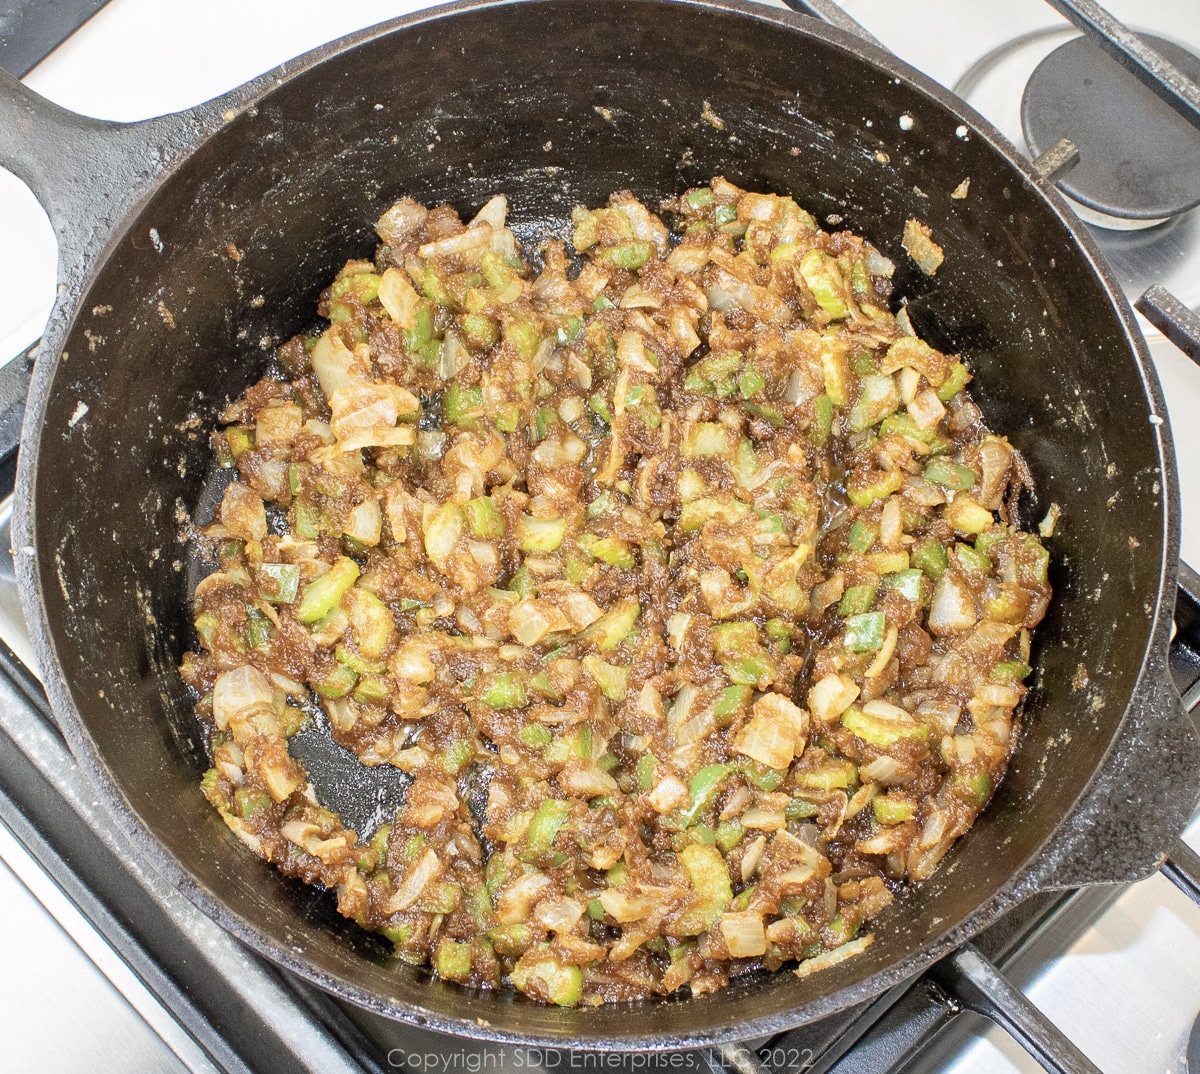 sauted onions, celery and bell peppers in a dutch oven